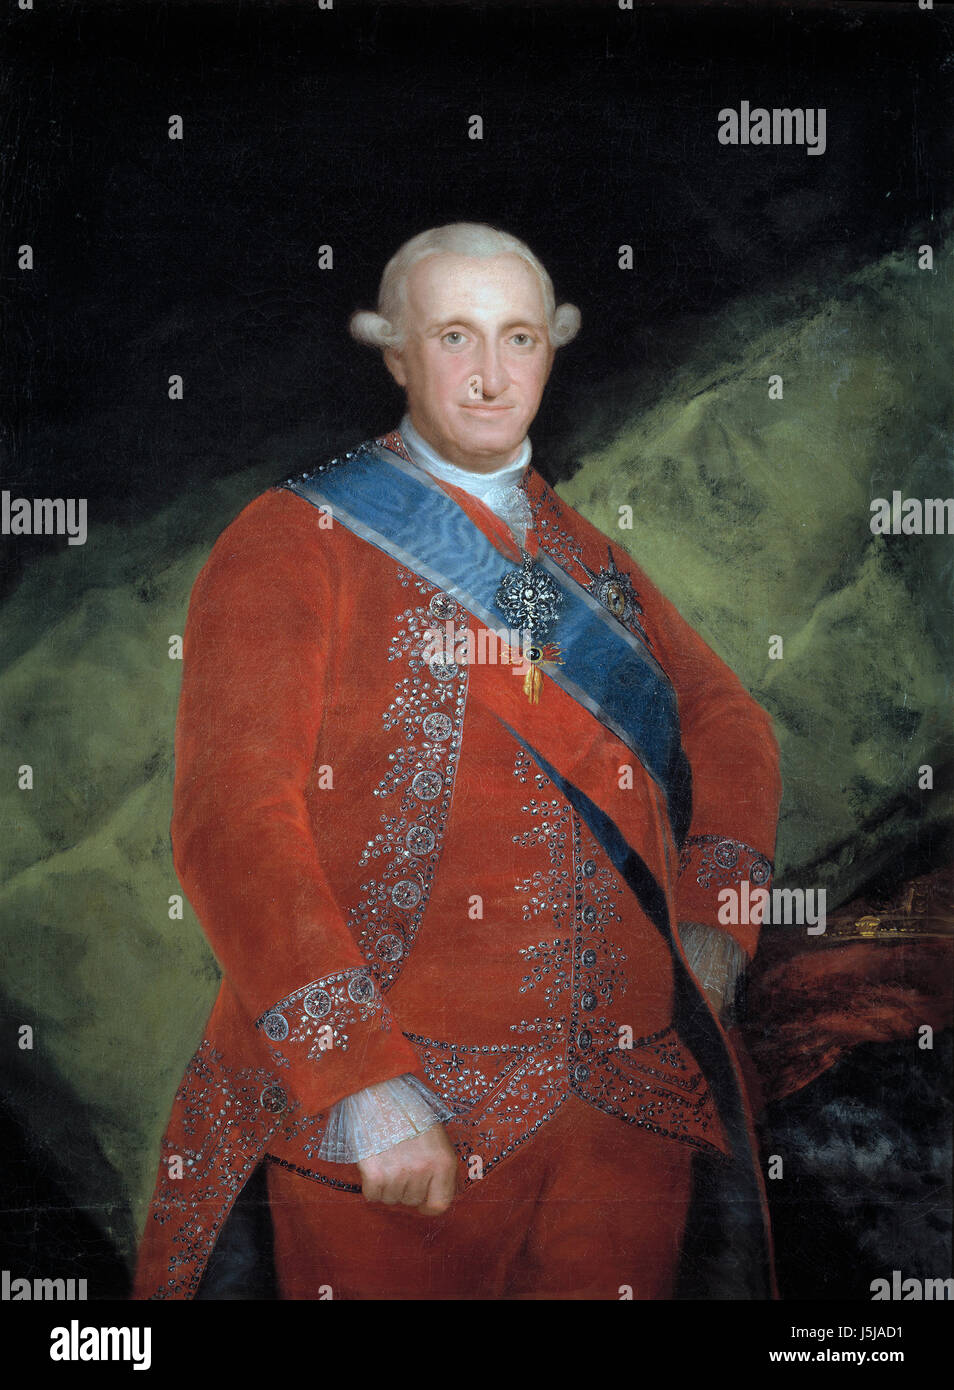 CHARLES IV of SPAIN (1748-1819) by Goya Stock Photo